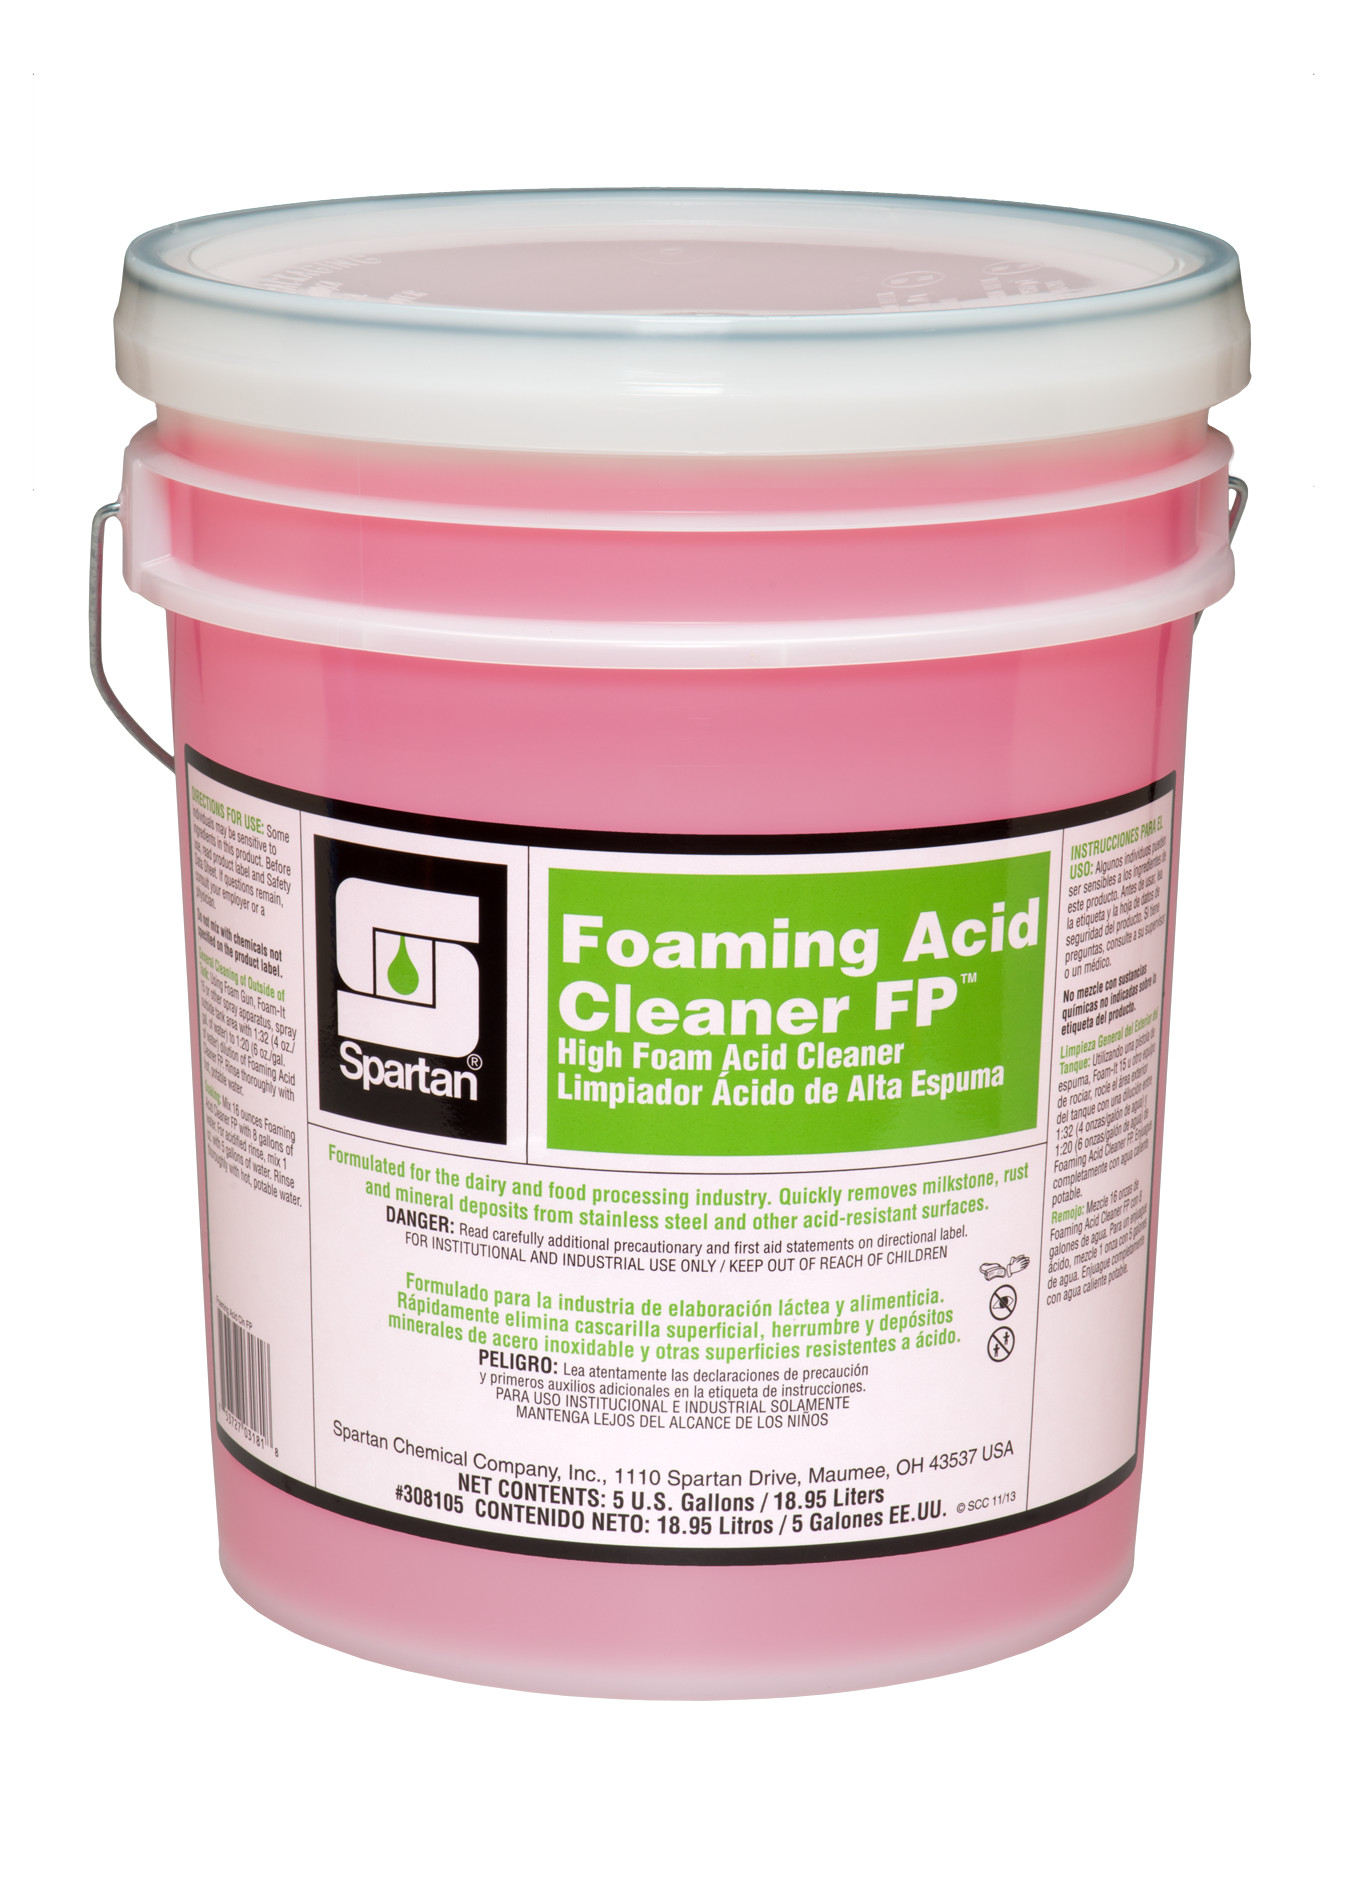 Spartan Chemical Company Foaming Acid Cleaner FP, 5 GAL PAIL